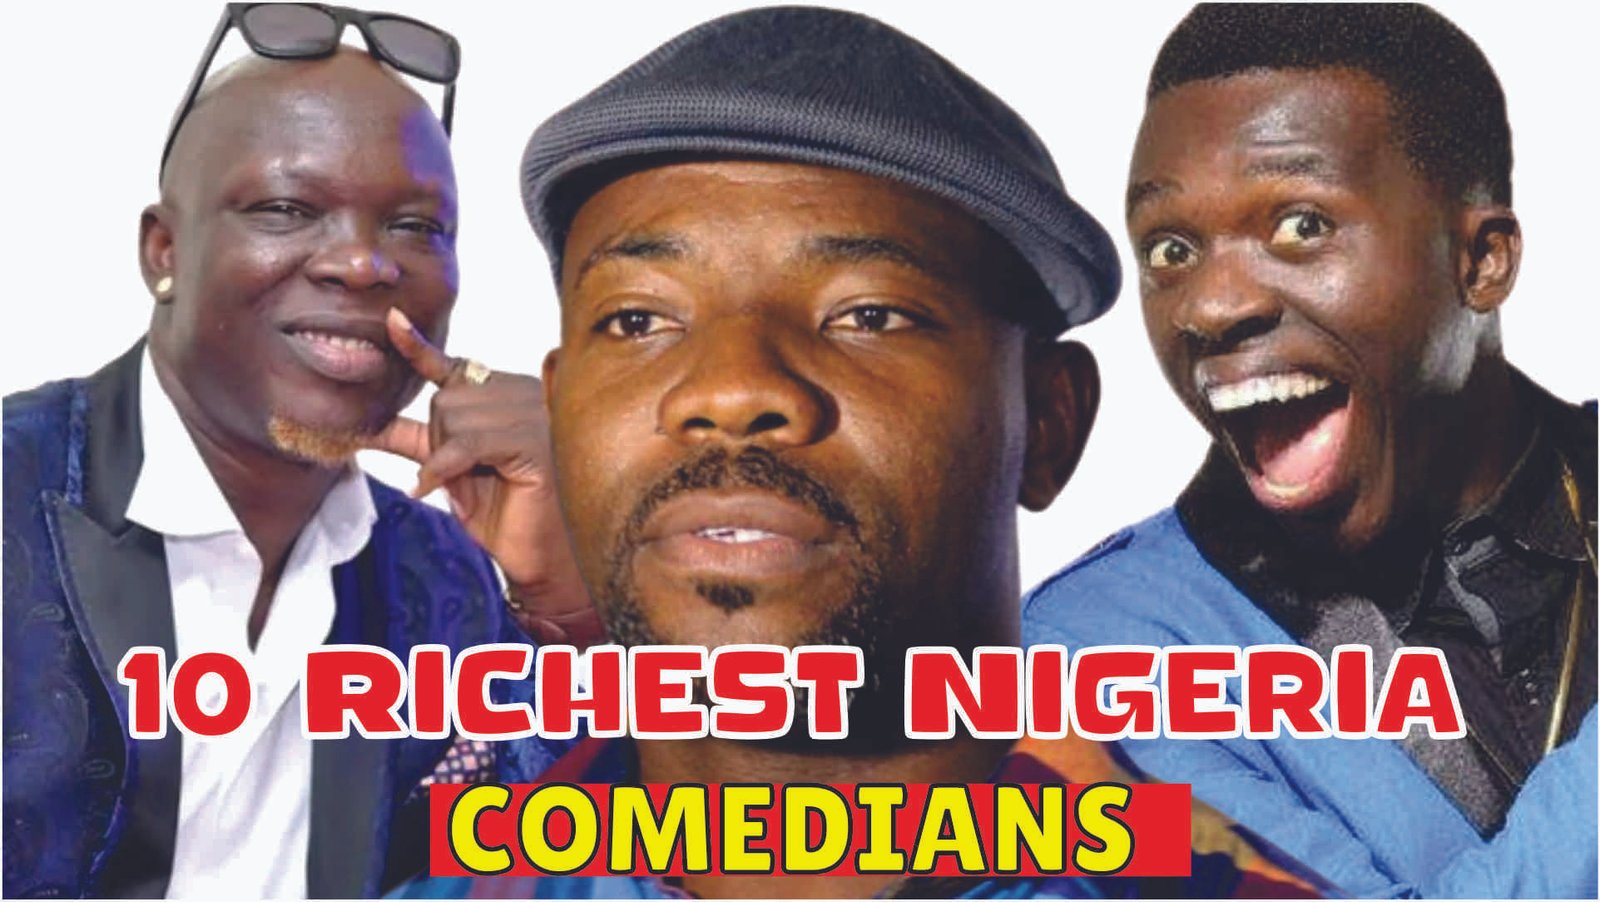 10 Richest Comedians in Nigeria (2022) - Networth & How They Started